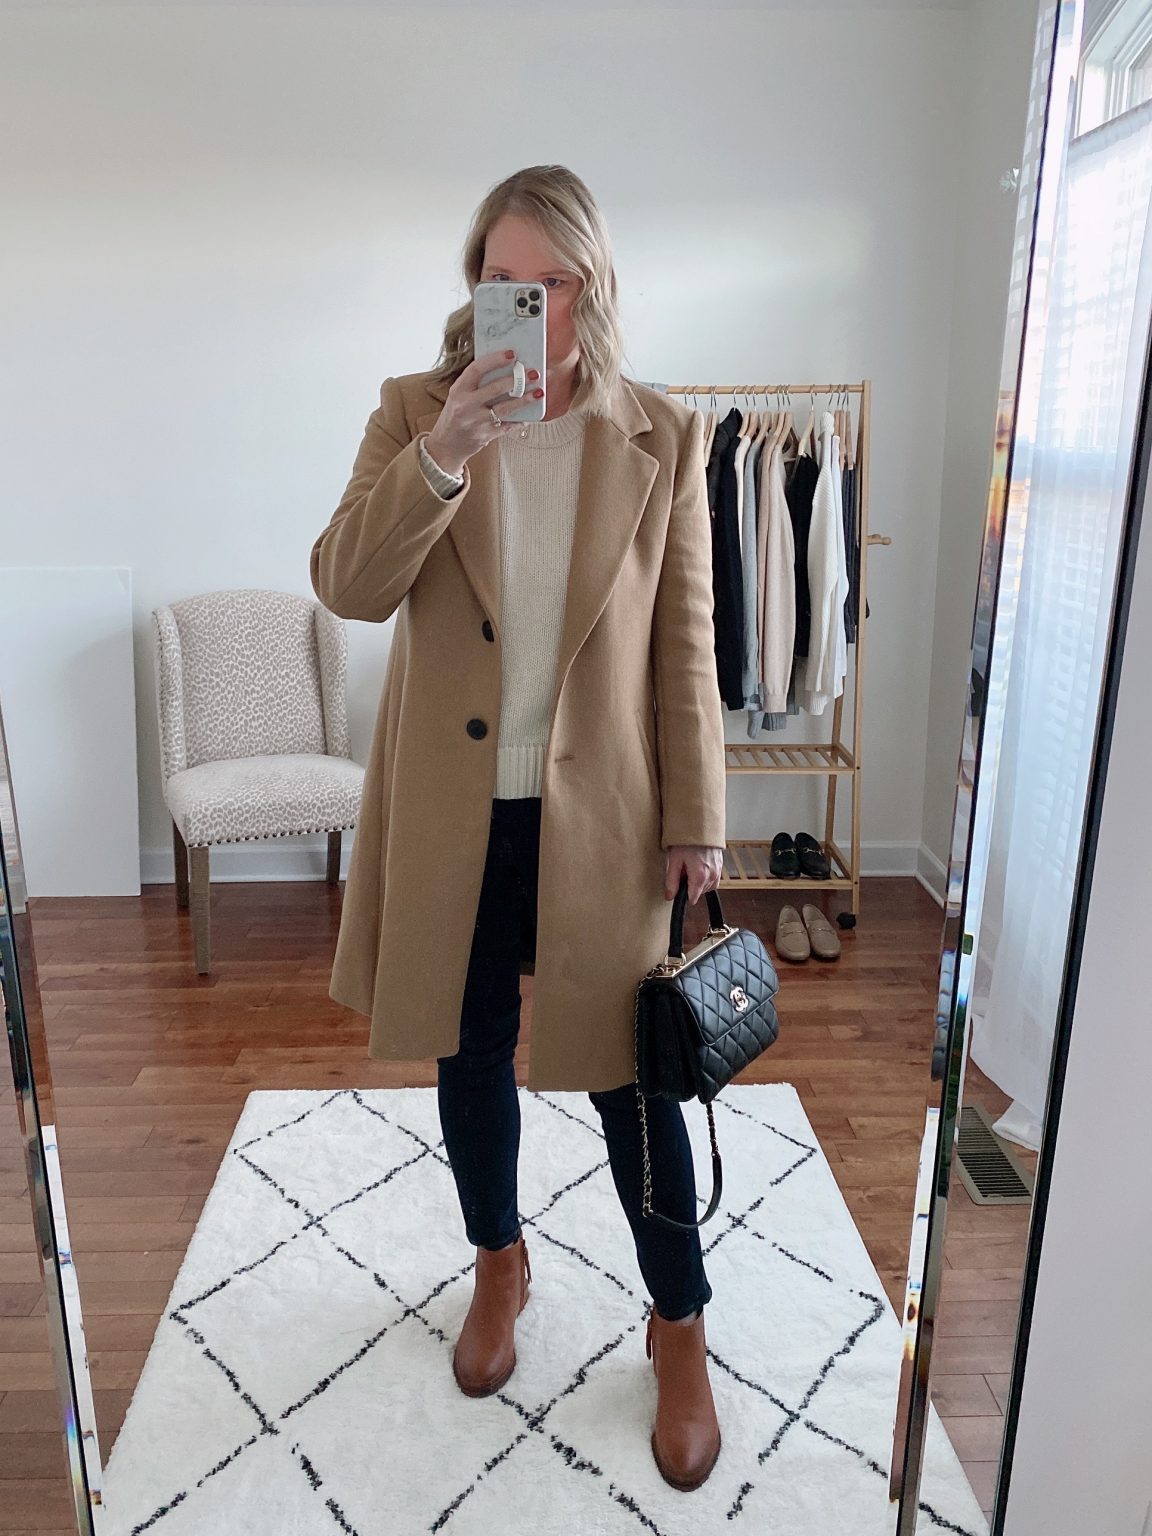 Instagram Outfits Diary: November & December 2021 - Classy Yet Trendy